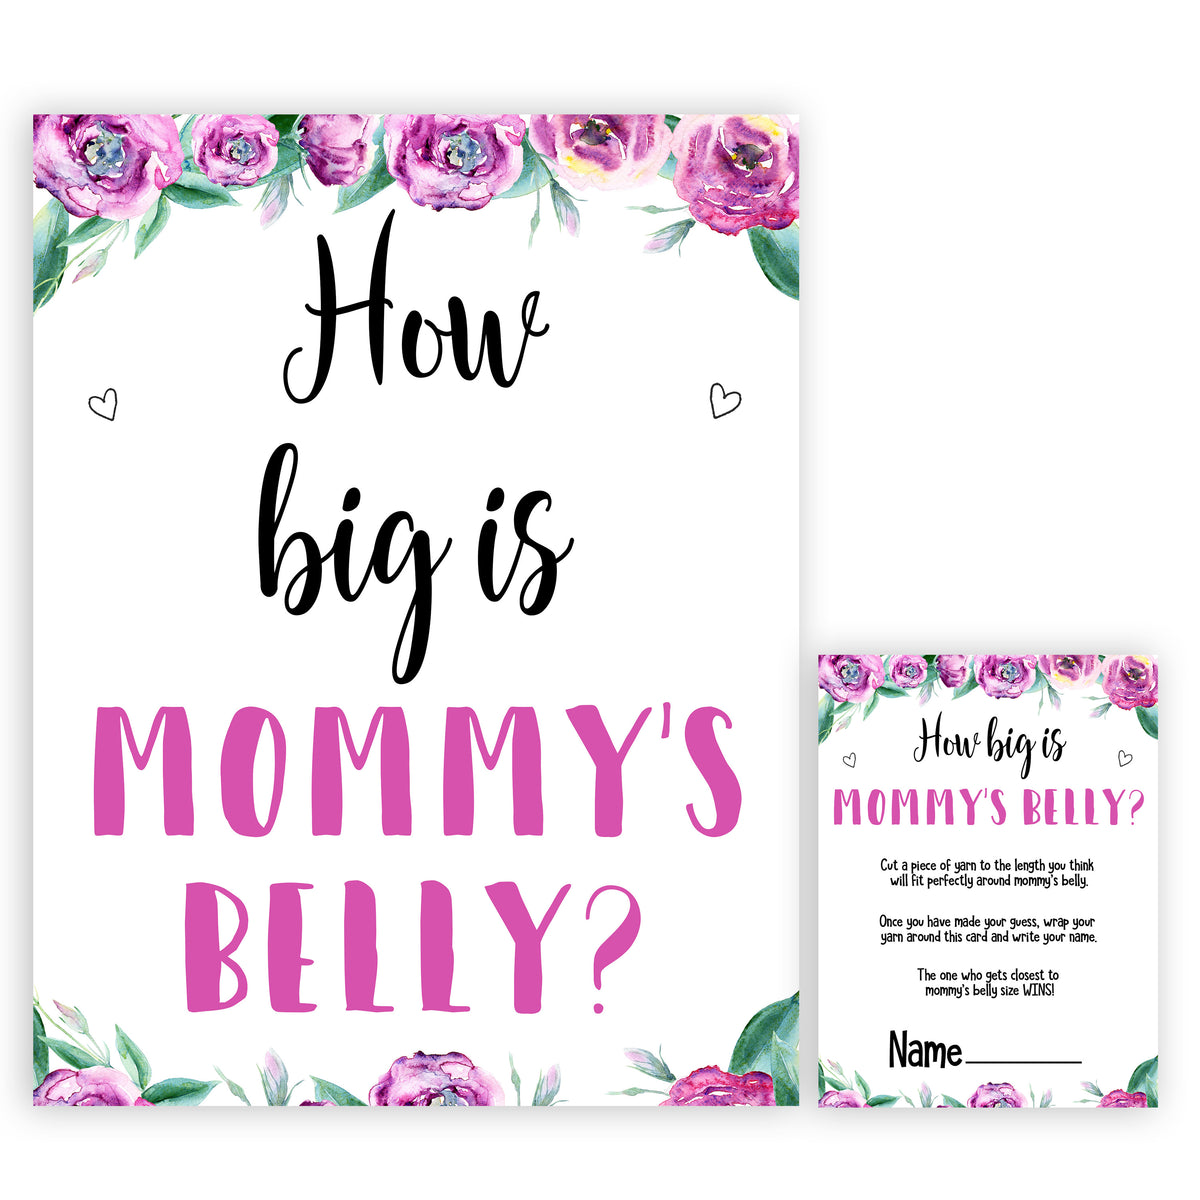 Purple peonies how big is mommys belly baby shower games, printable baby shower games, fun baby shower games, baby shower games, popular baby shower games, floral baby shower games, purple baby shower themes